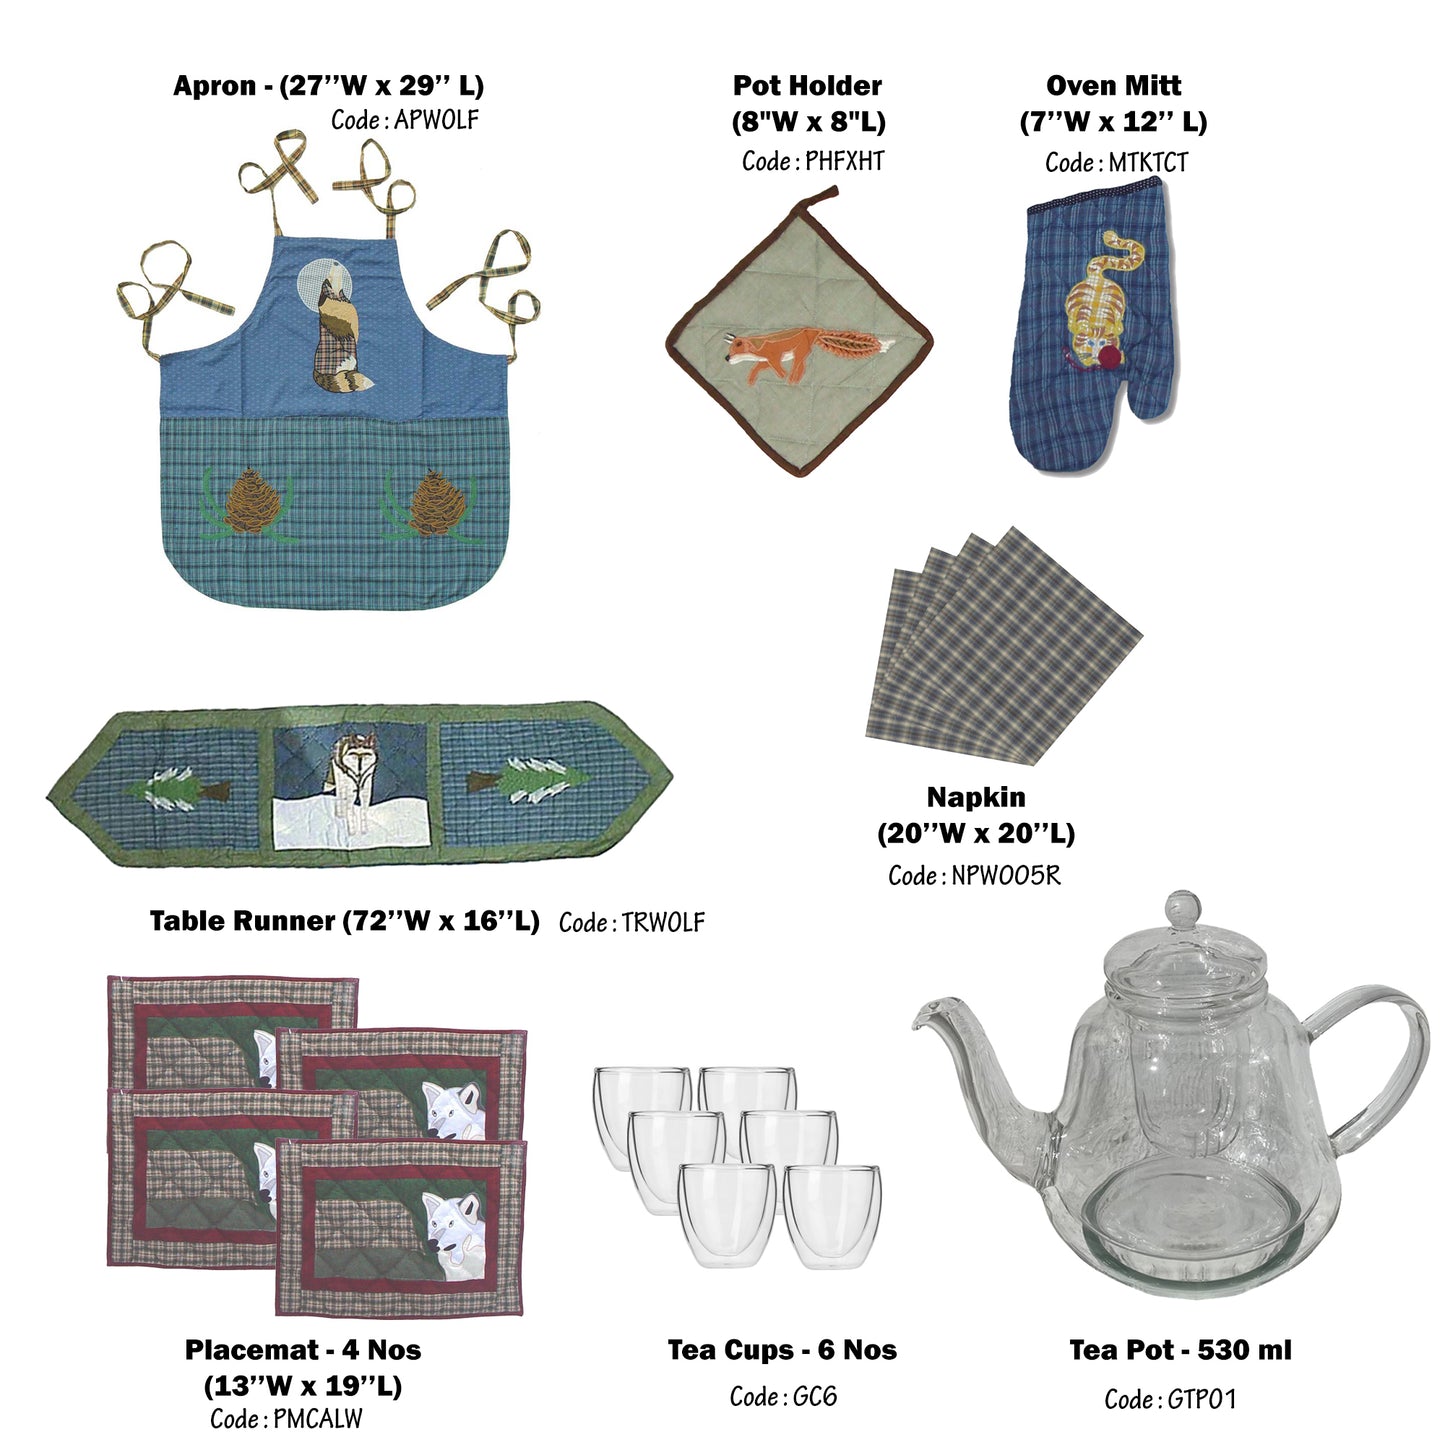 Table Top Ensemble sets- Combo of Apron, Over Mitt, Pot Holder, Table Runner, Placemat, Napkins, Double Layer Tea Pot and 6 pieces Glass Set